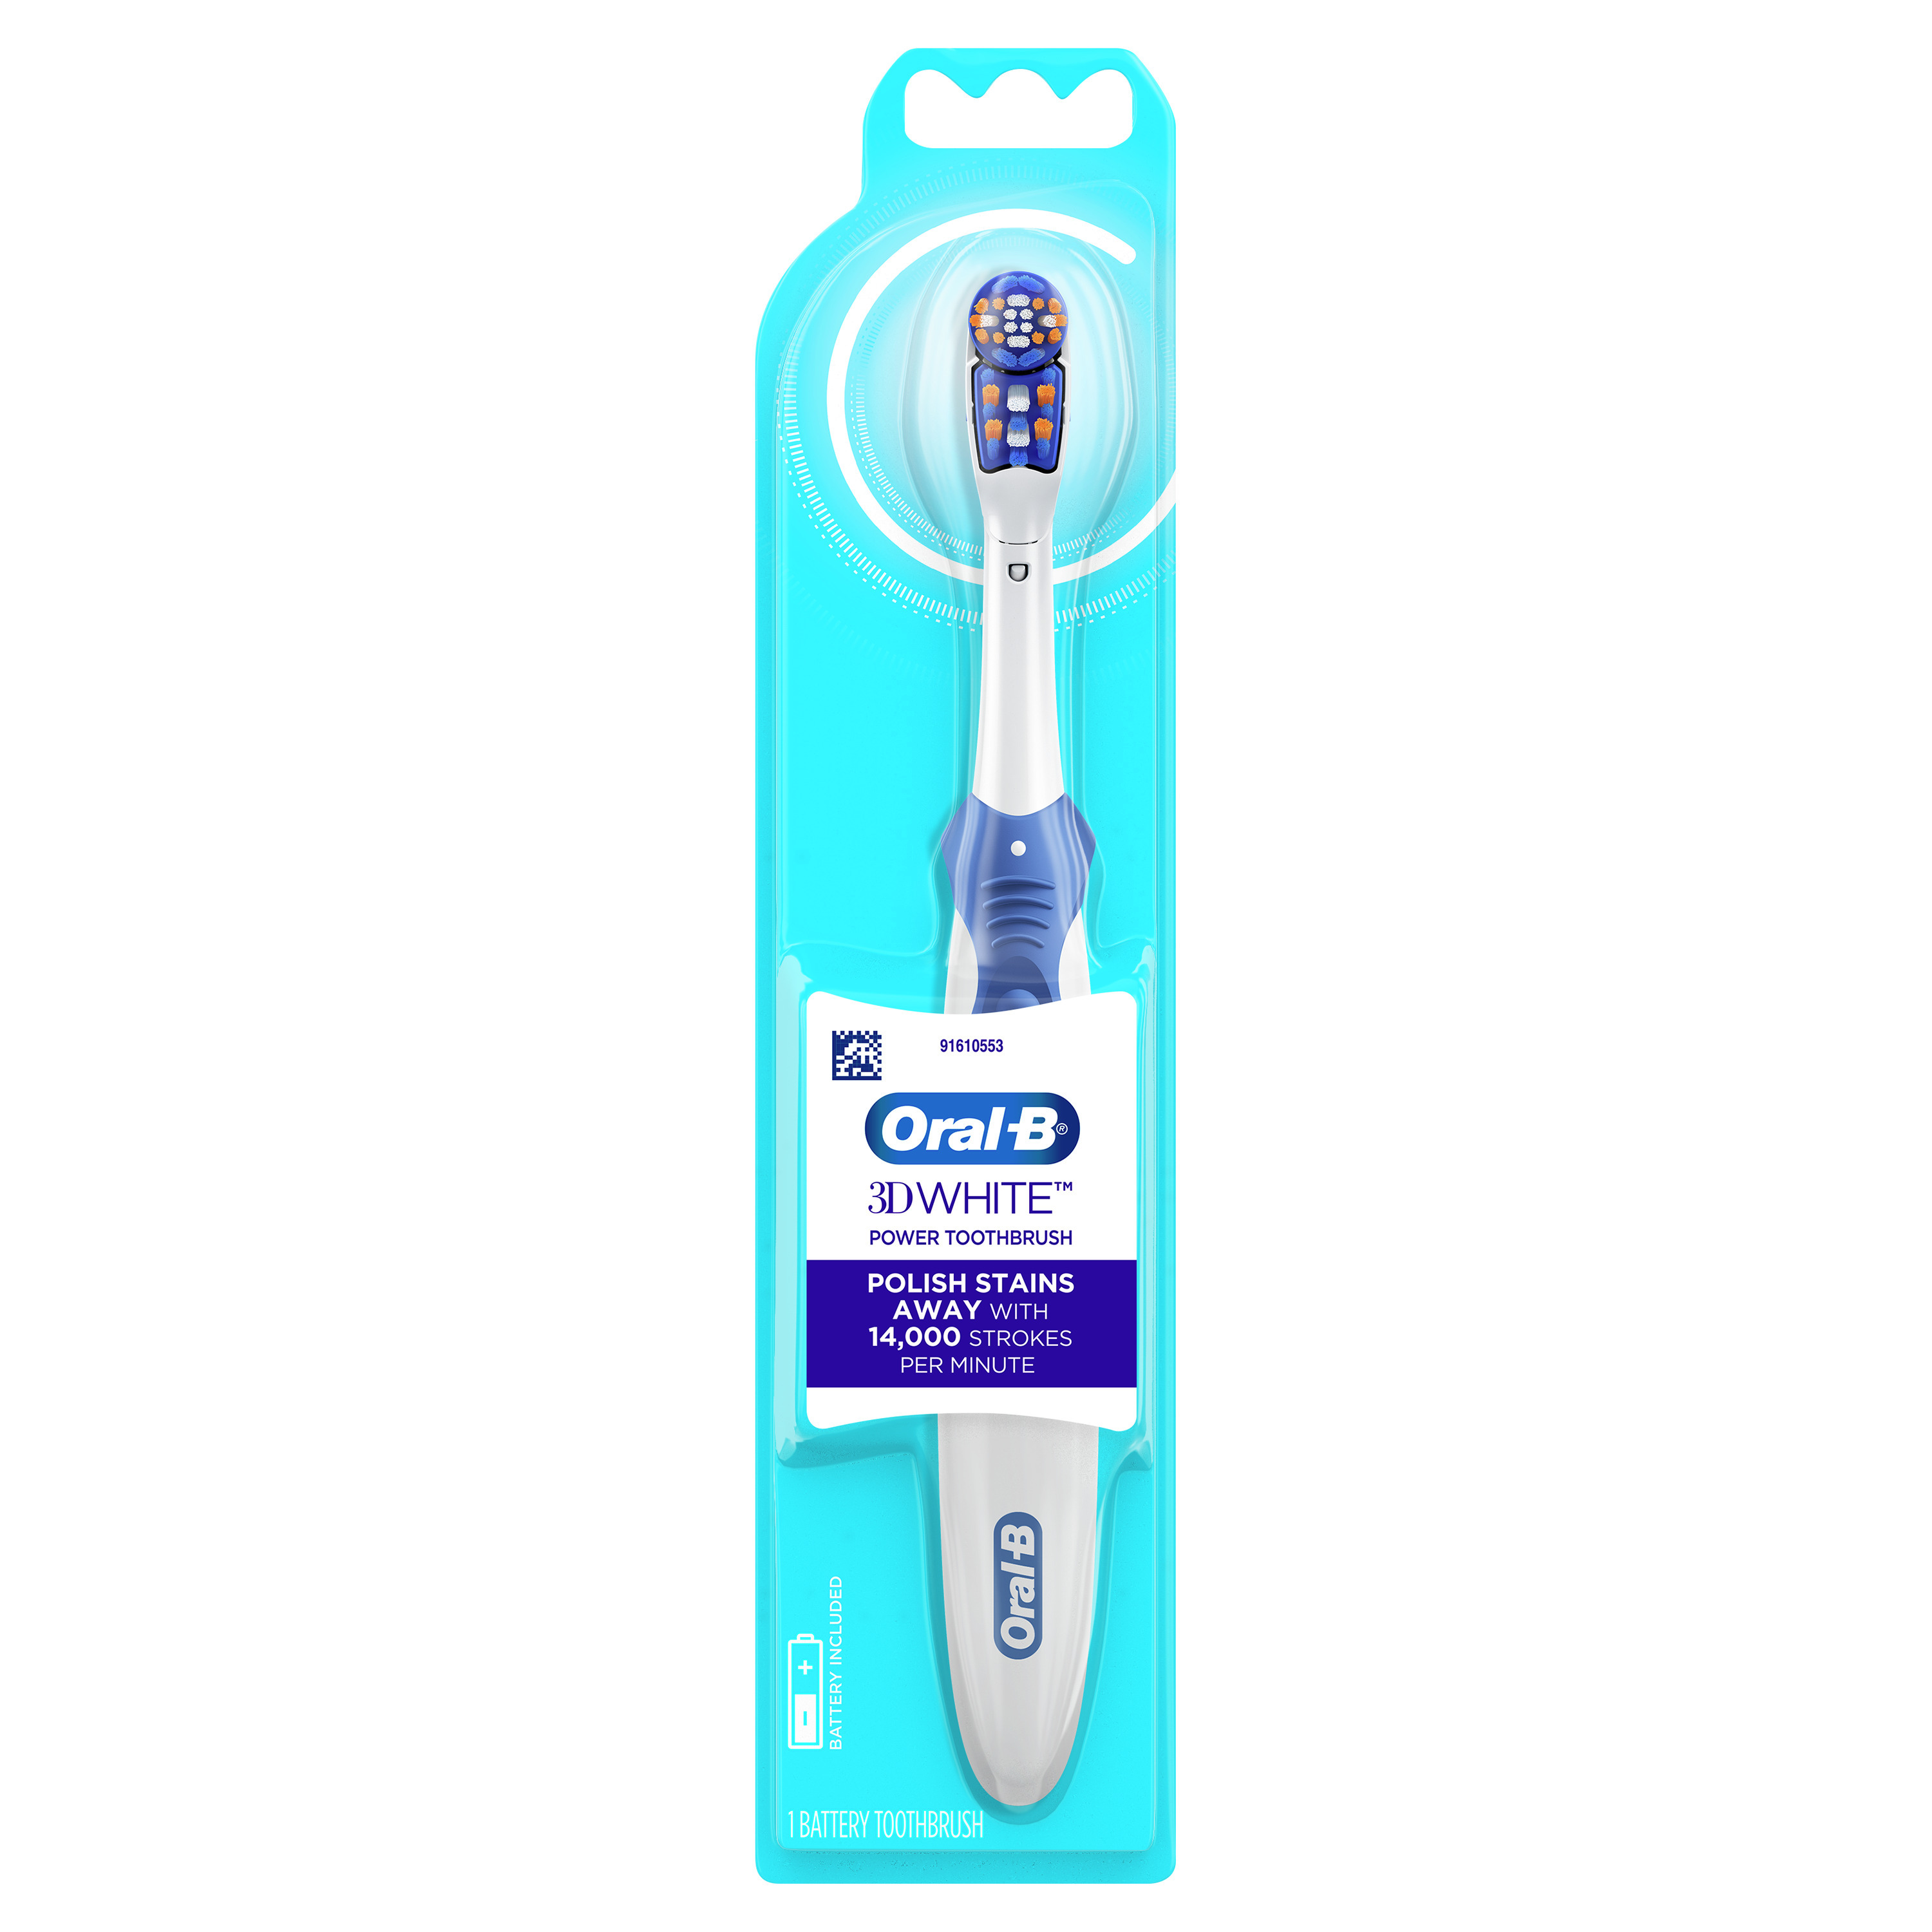 Oral-B 3D White Battery Toothbrush, 1 Count, Colors May Vary, for Adults and Children 3+ - image 7 of 9